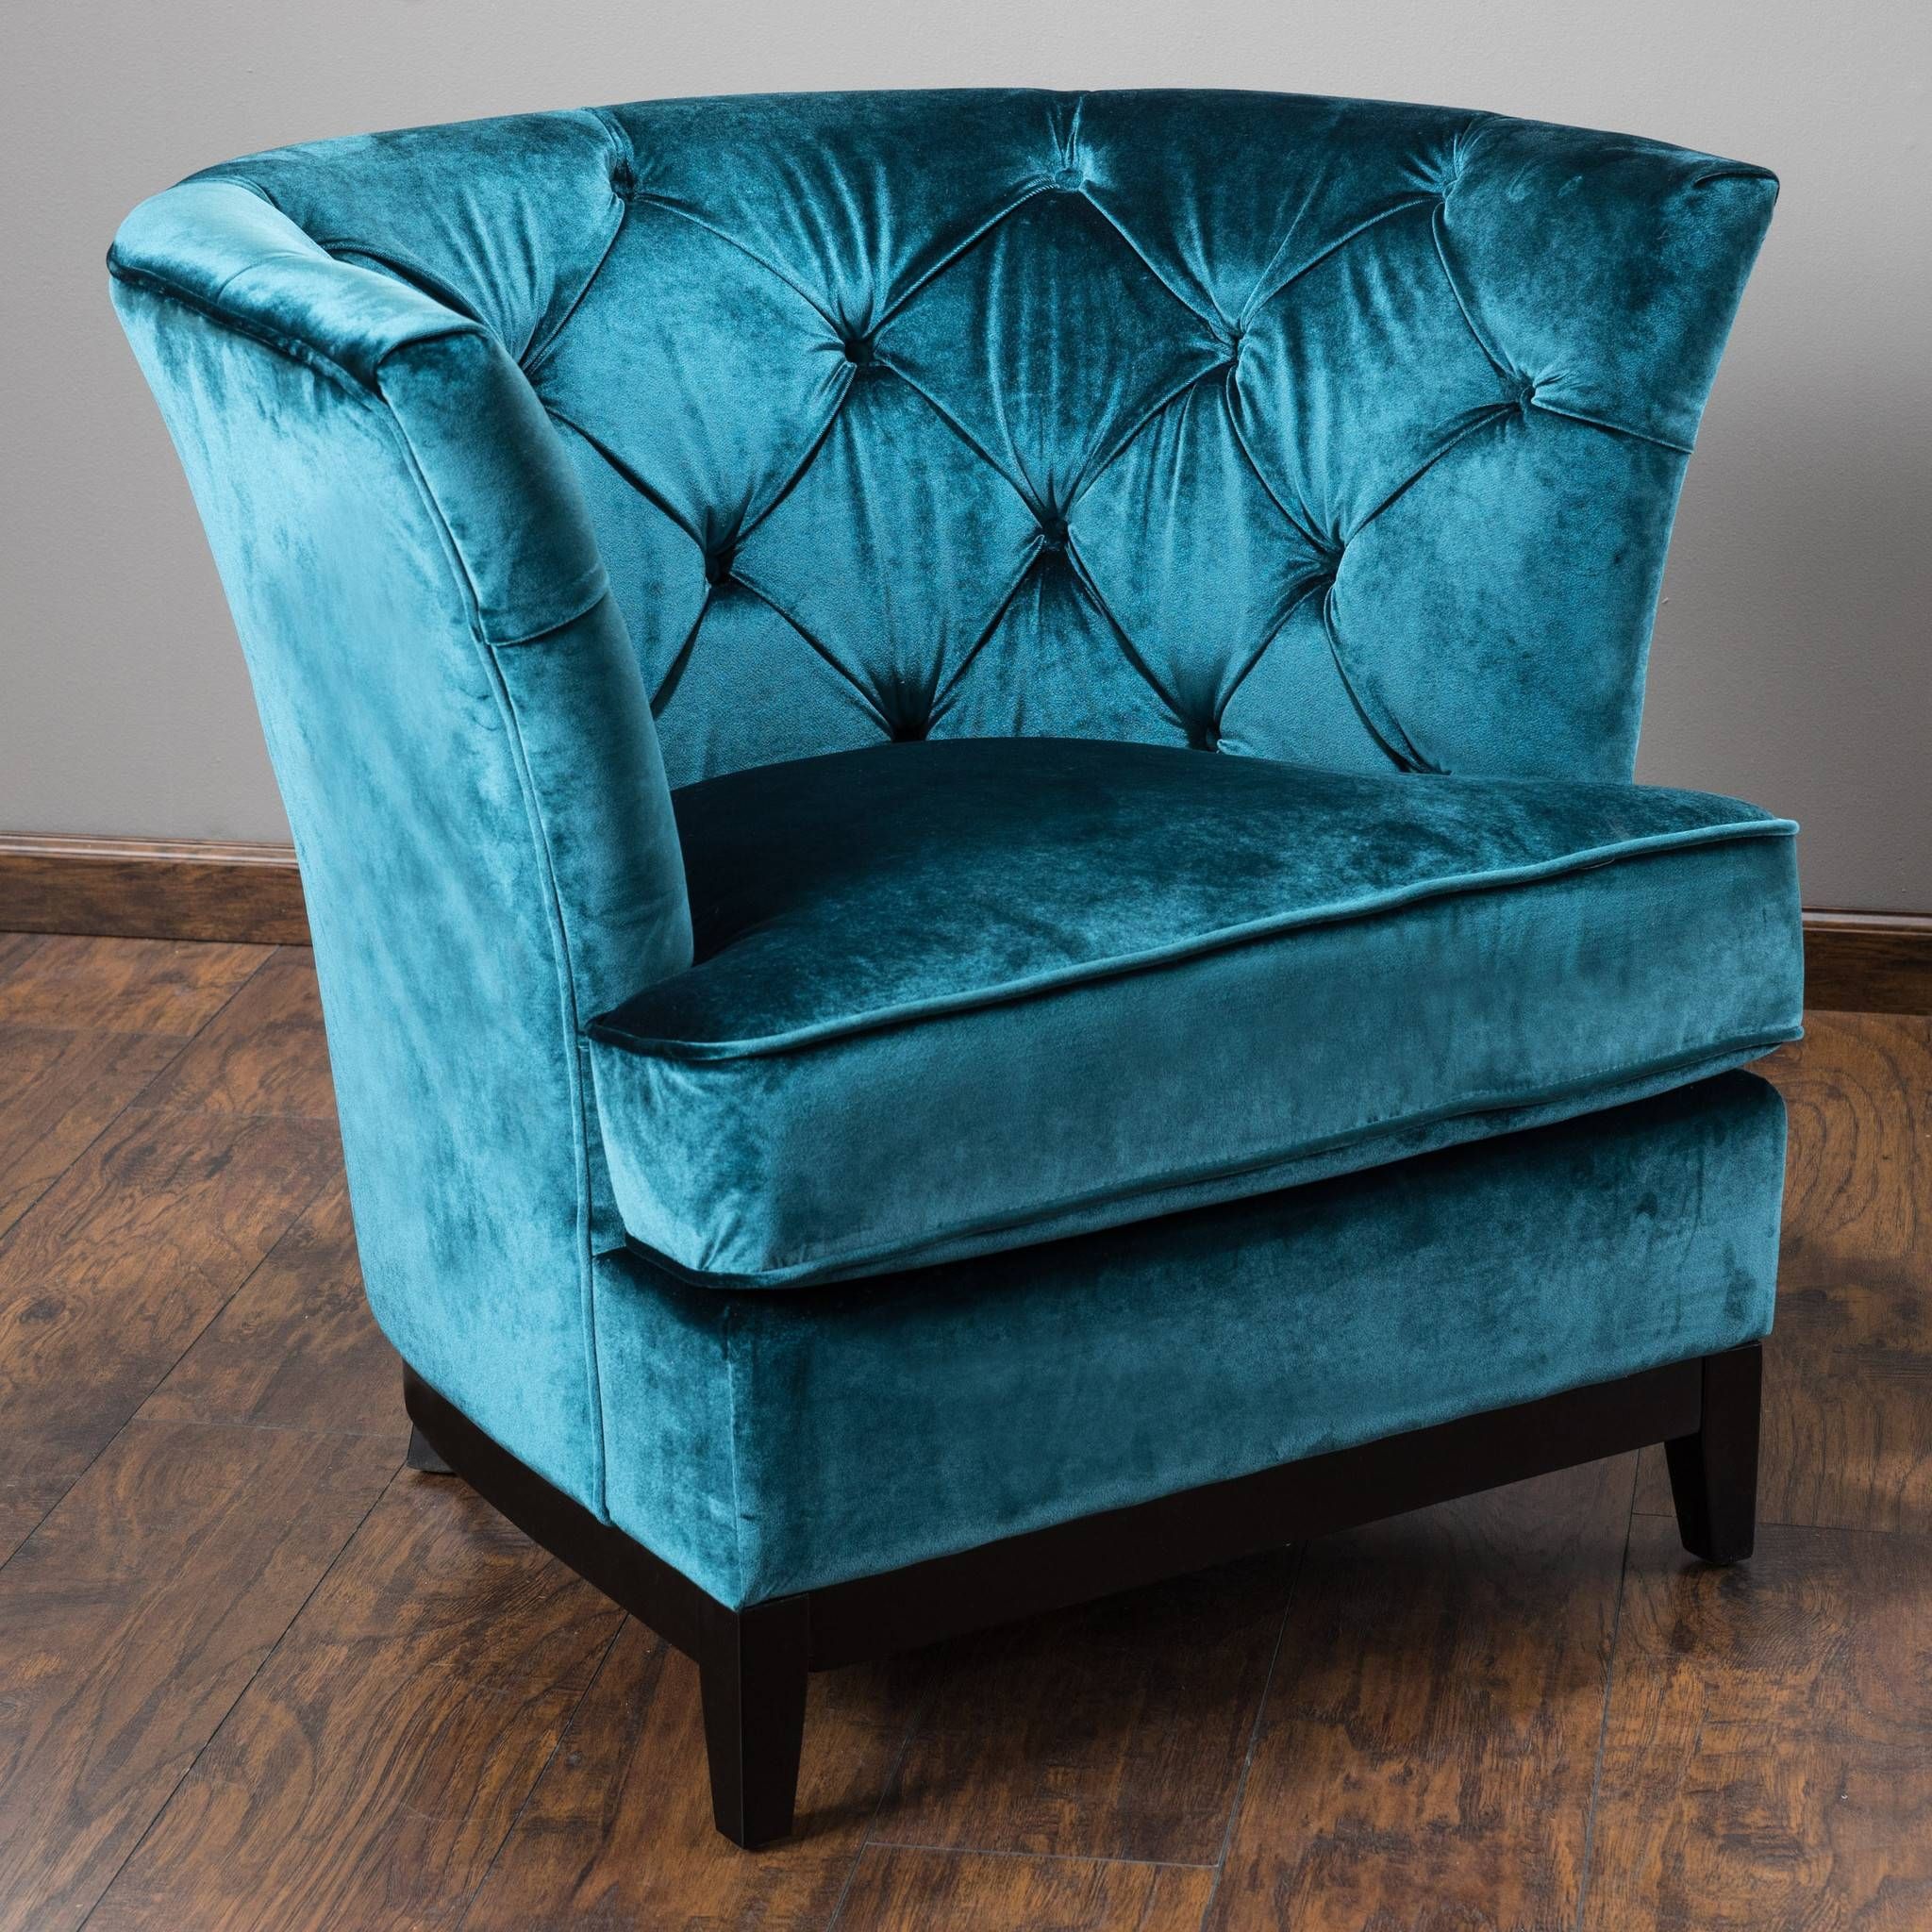 Sofas Center : Teal Blueofaofas Pillowsteal Foraleteallipcoverblue Pertaining To Blue Sofa Chairs (View 1 of 30)